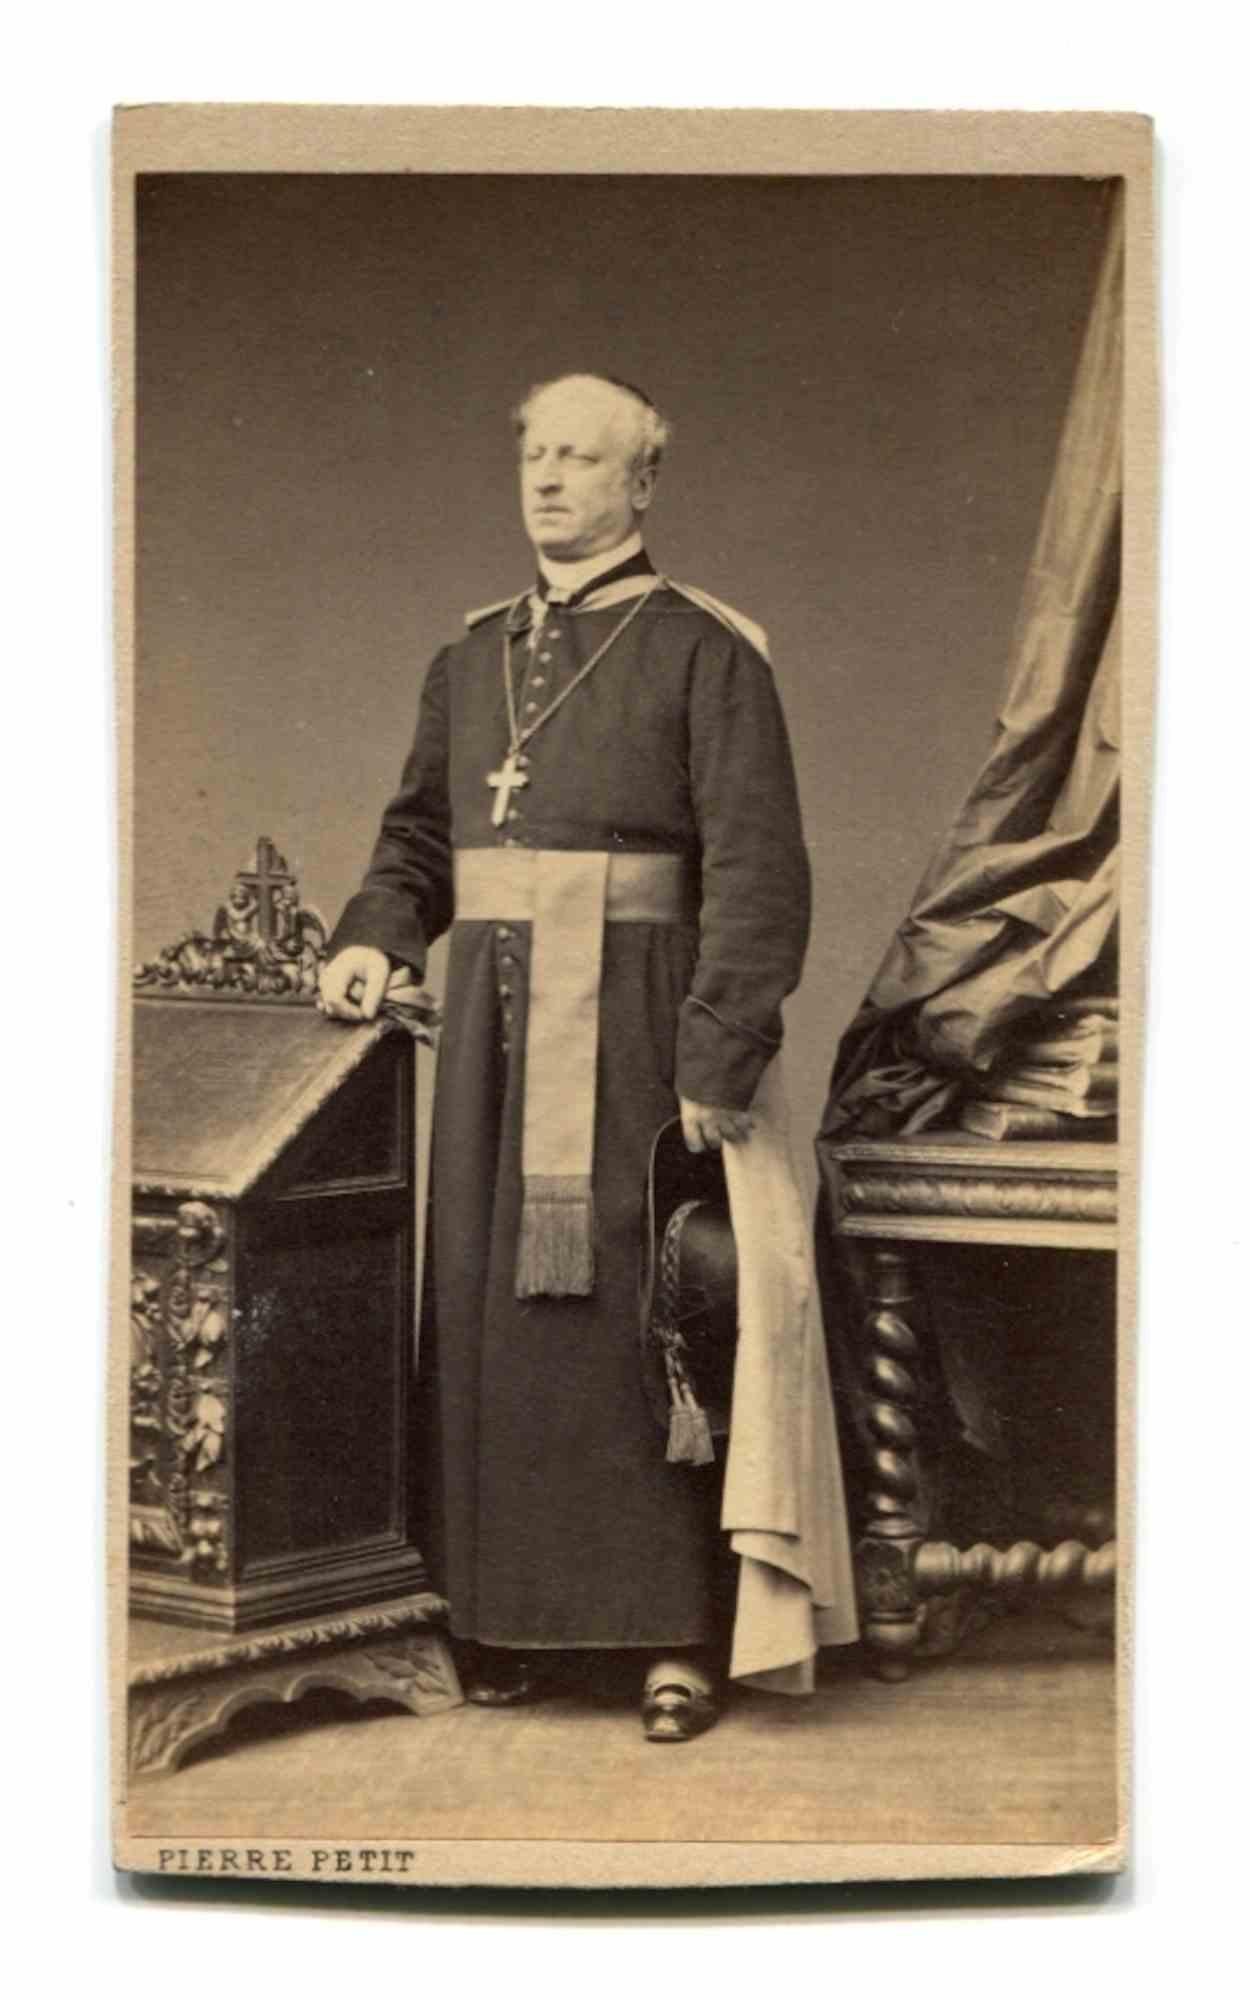 Unknown Figurative Photograph - Historical Photo - Portrait of Prelate by Pierre Petit - 19th Century 